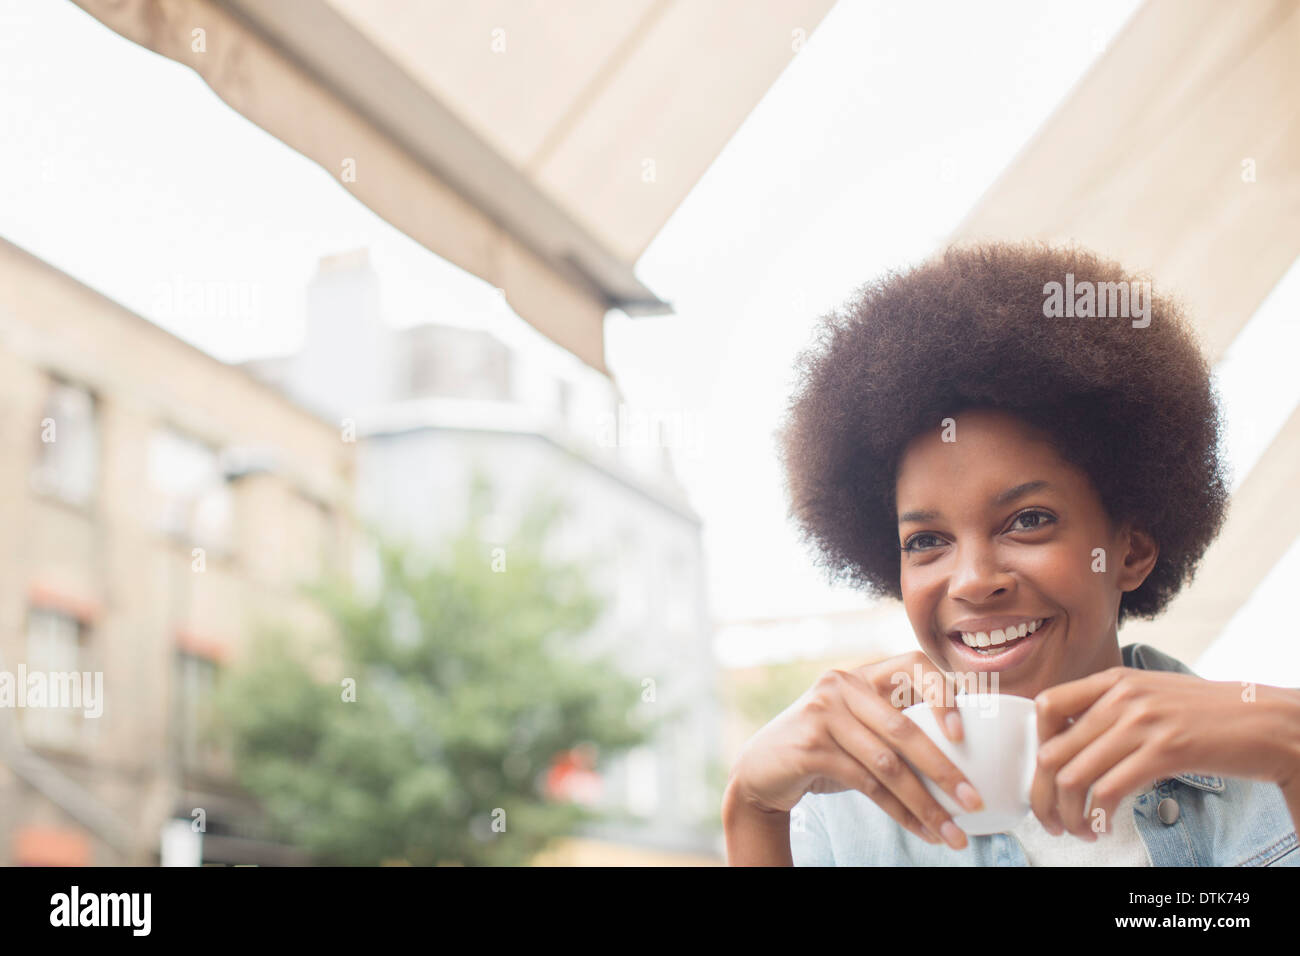 Woman drinking coffee at sidewalk cafe Banque D'Images